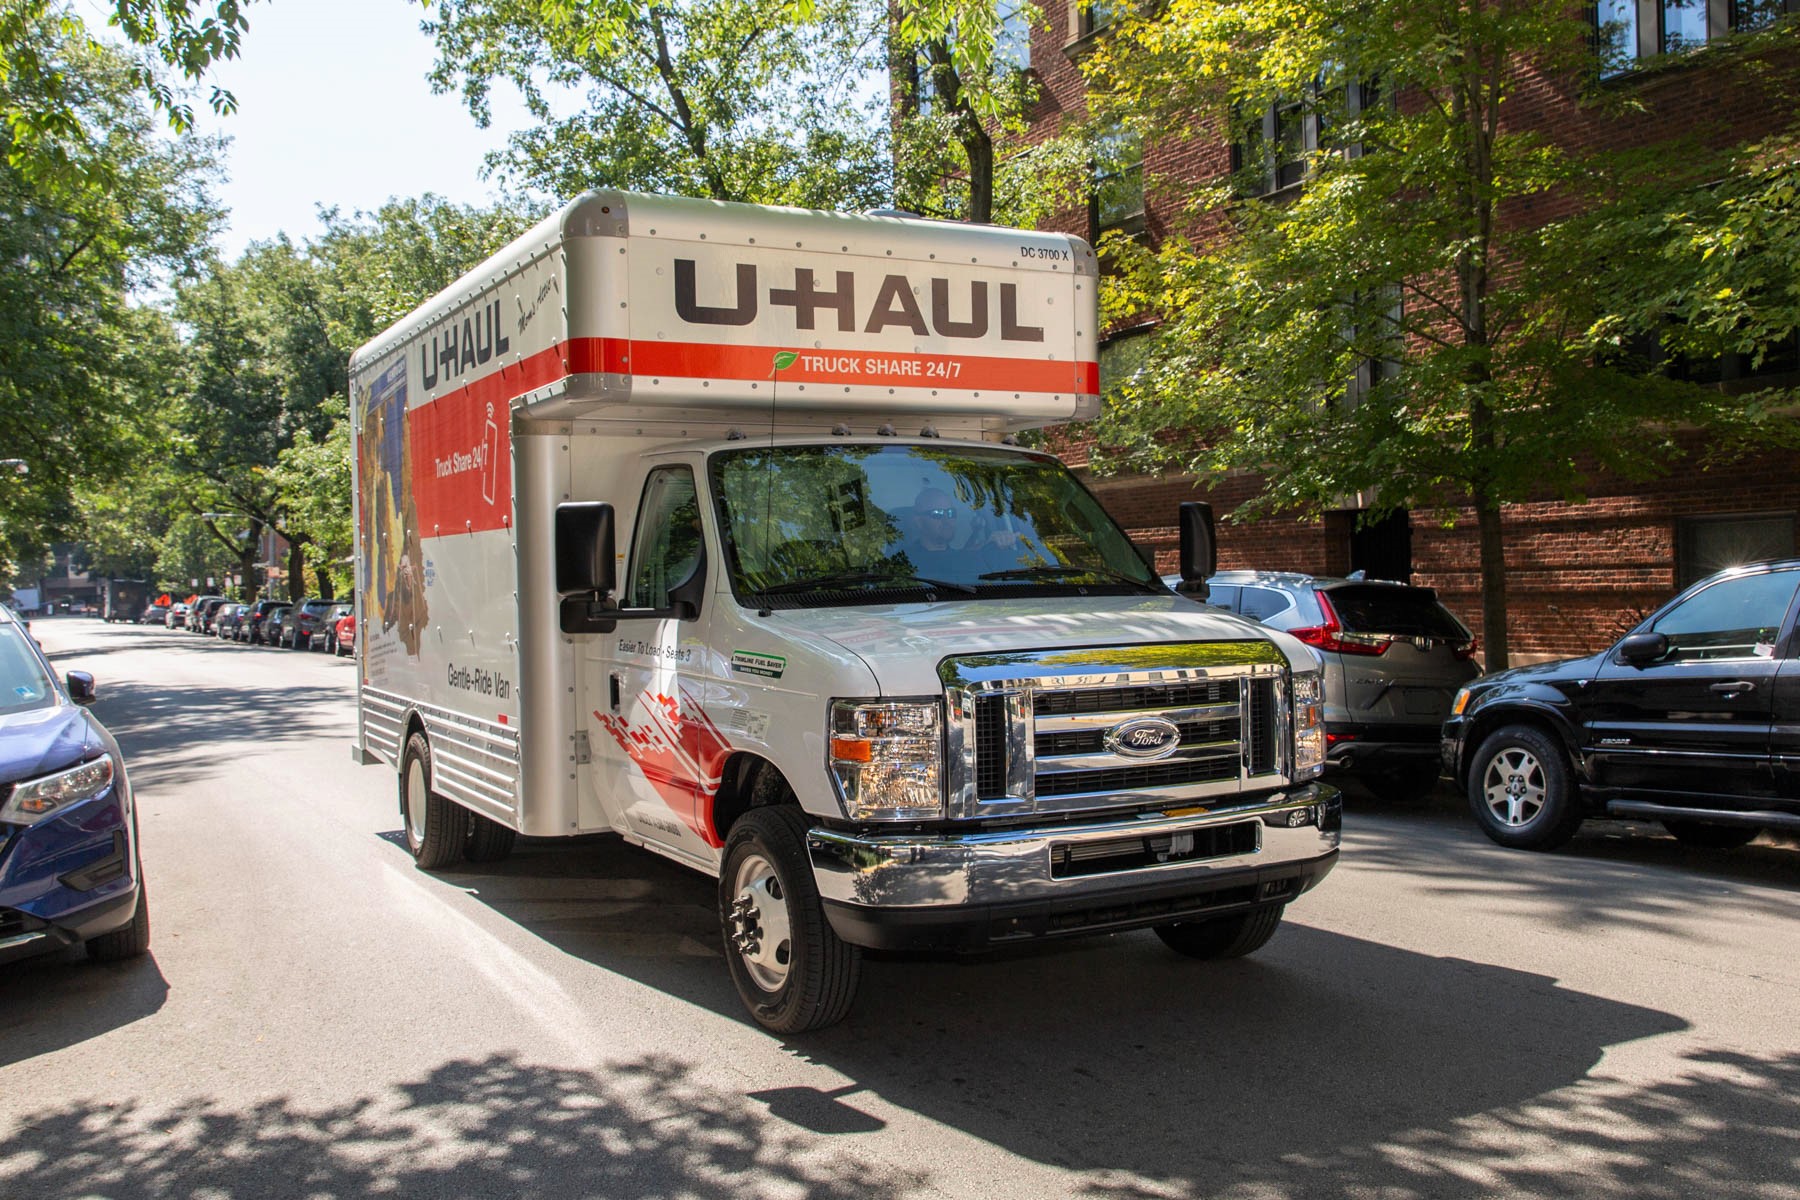 U-Haul Migration Trends: Top 25 Canadian Growth Cities of 2019